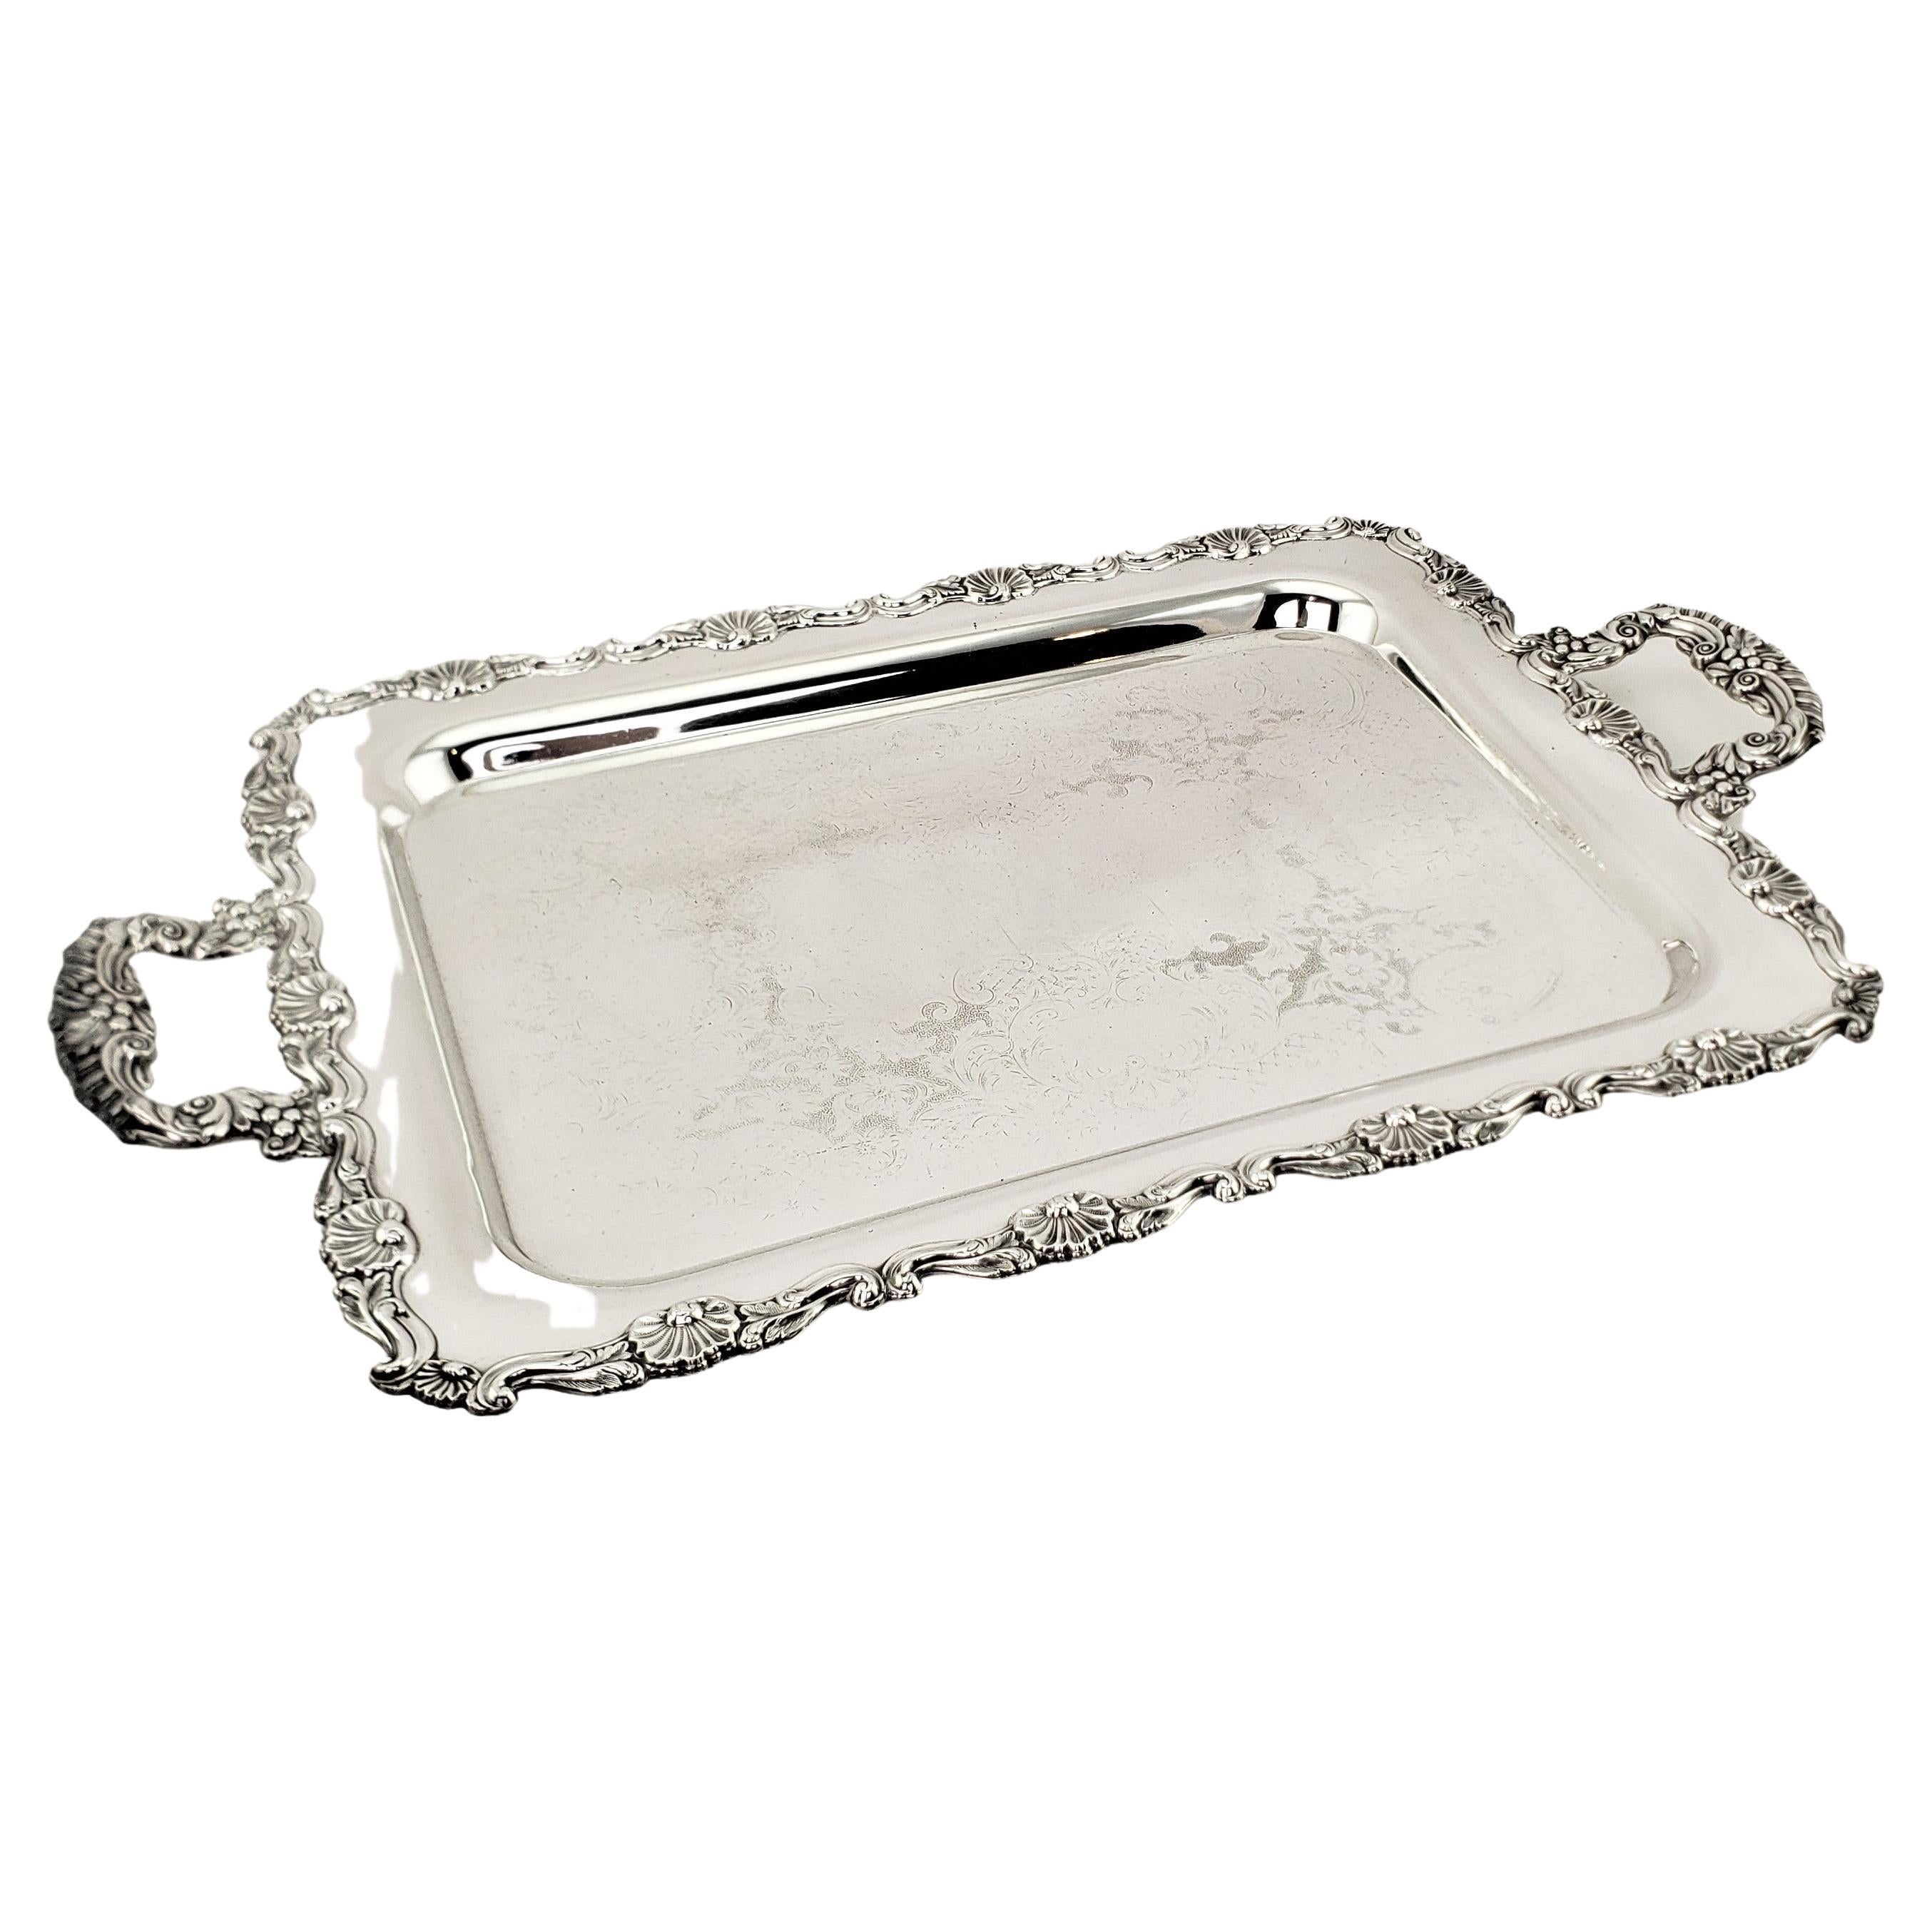 Antique Rectangular Silver Plated Serving Tray with Stylized Floral Decoration